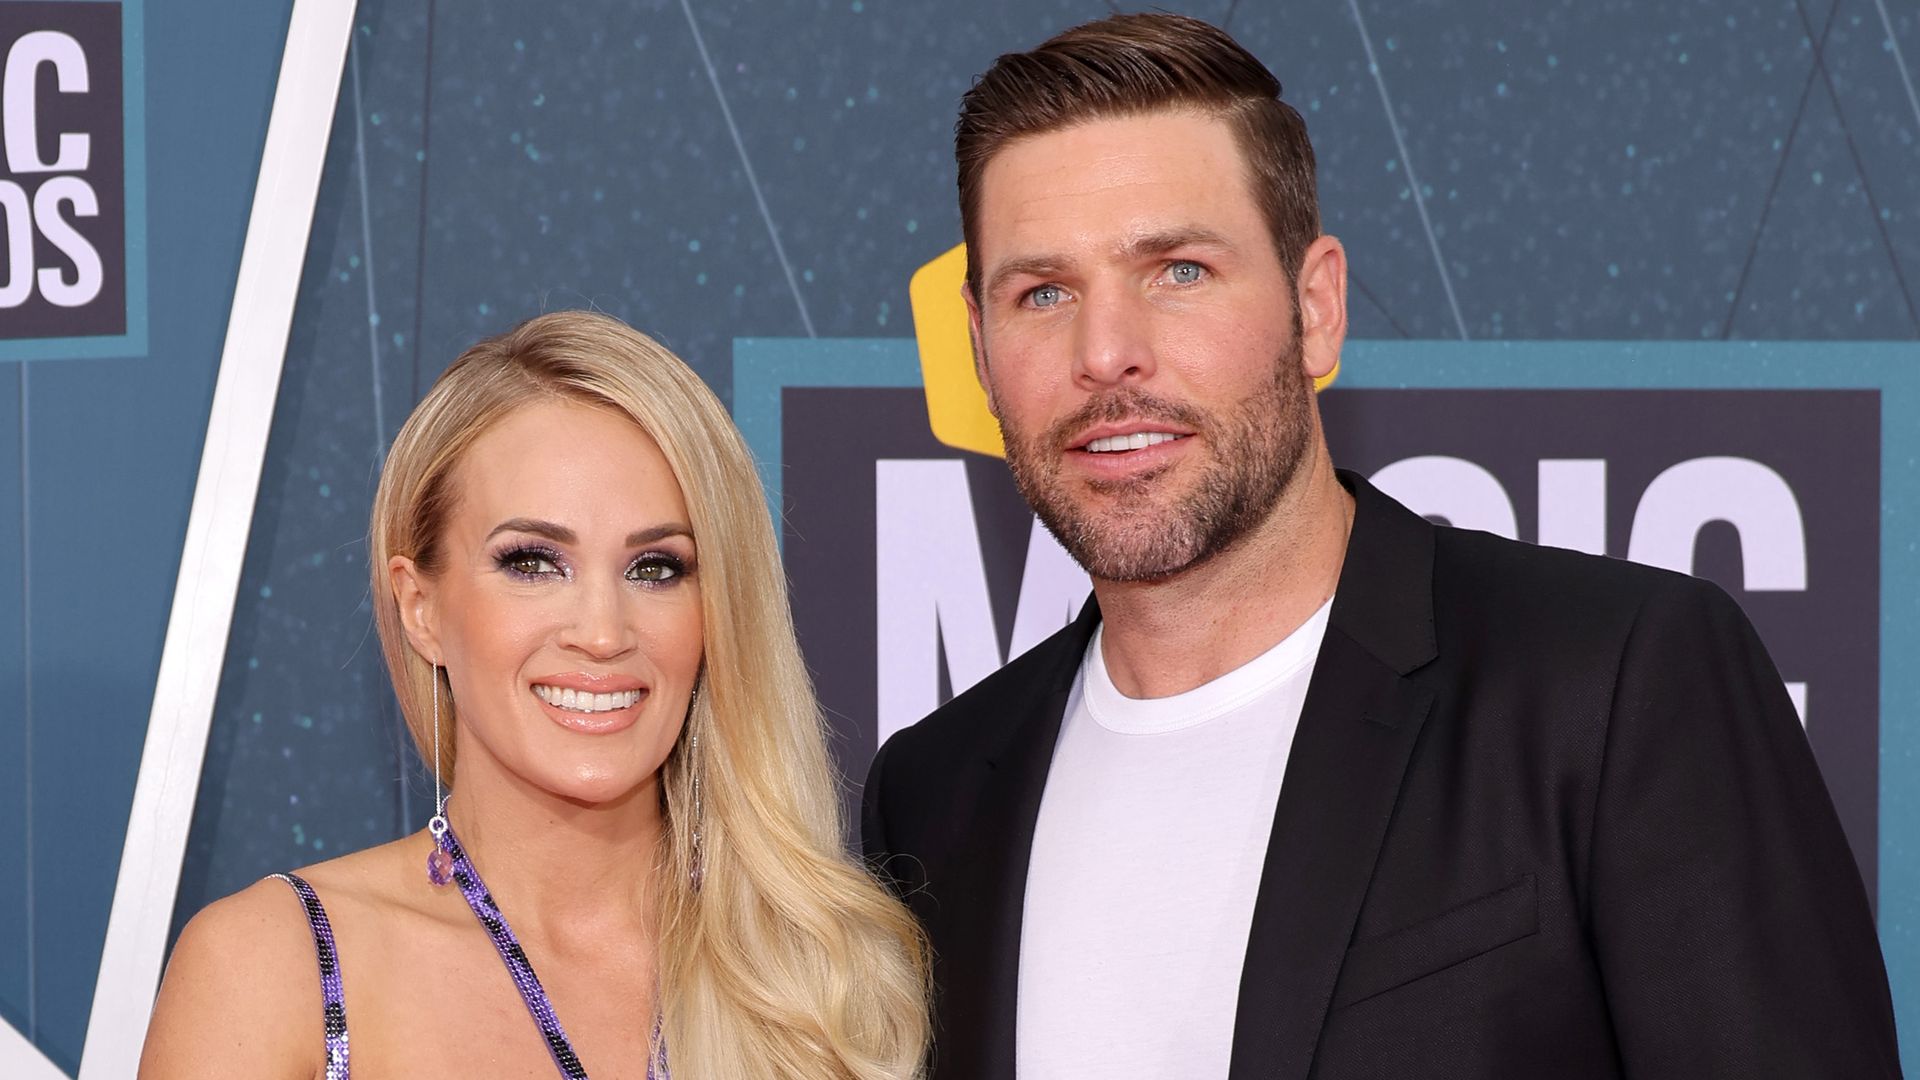 Carrie Underwood and Mike Fisher attend the 2022 CMT Music Awards at Nashville Municipal Auditorium on April 11, 2022 in Nashville, Tennessee